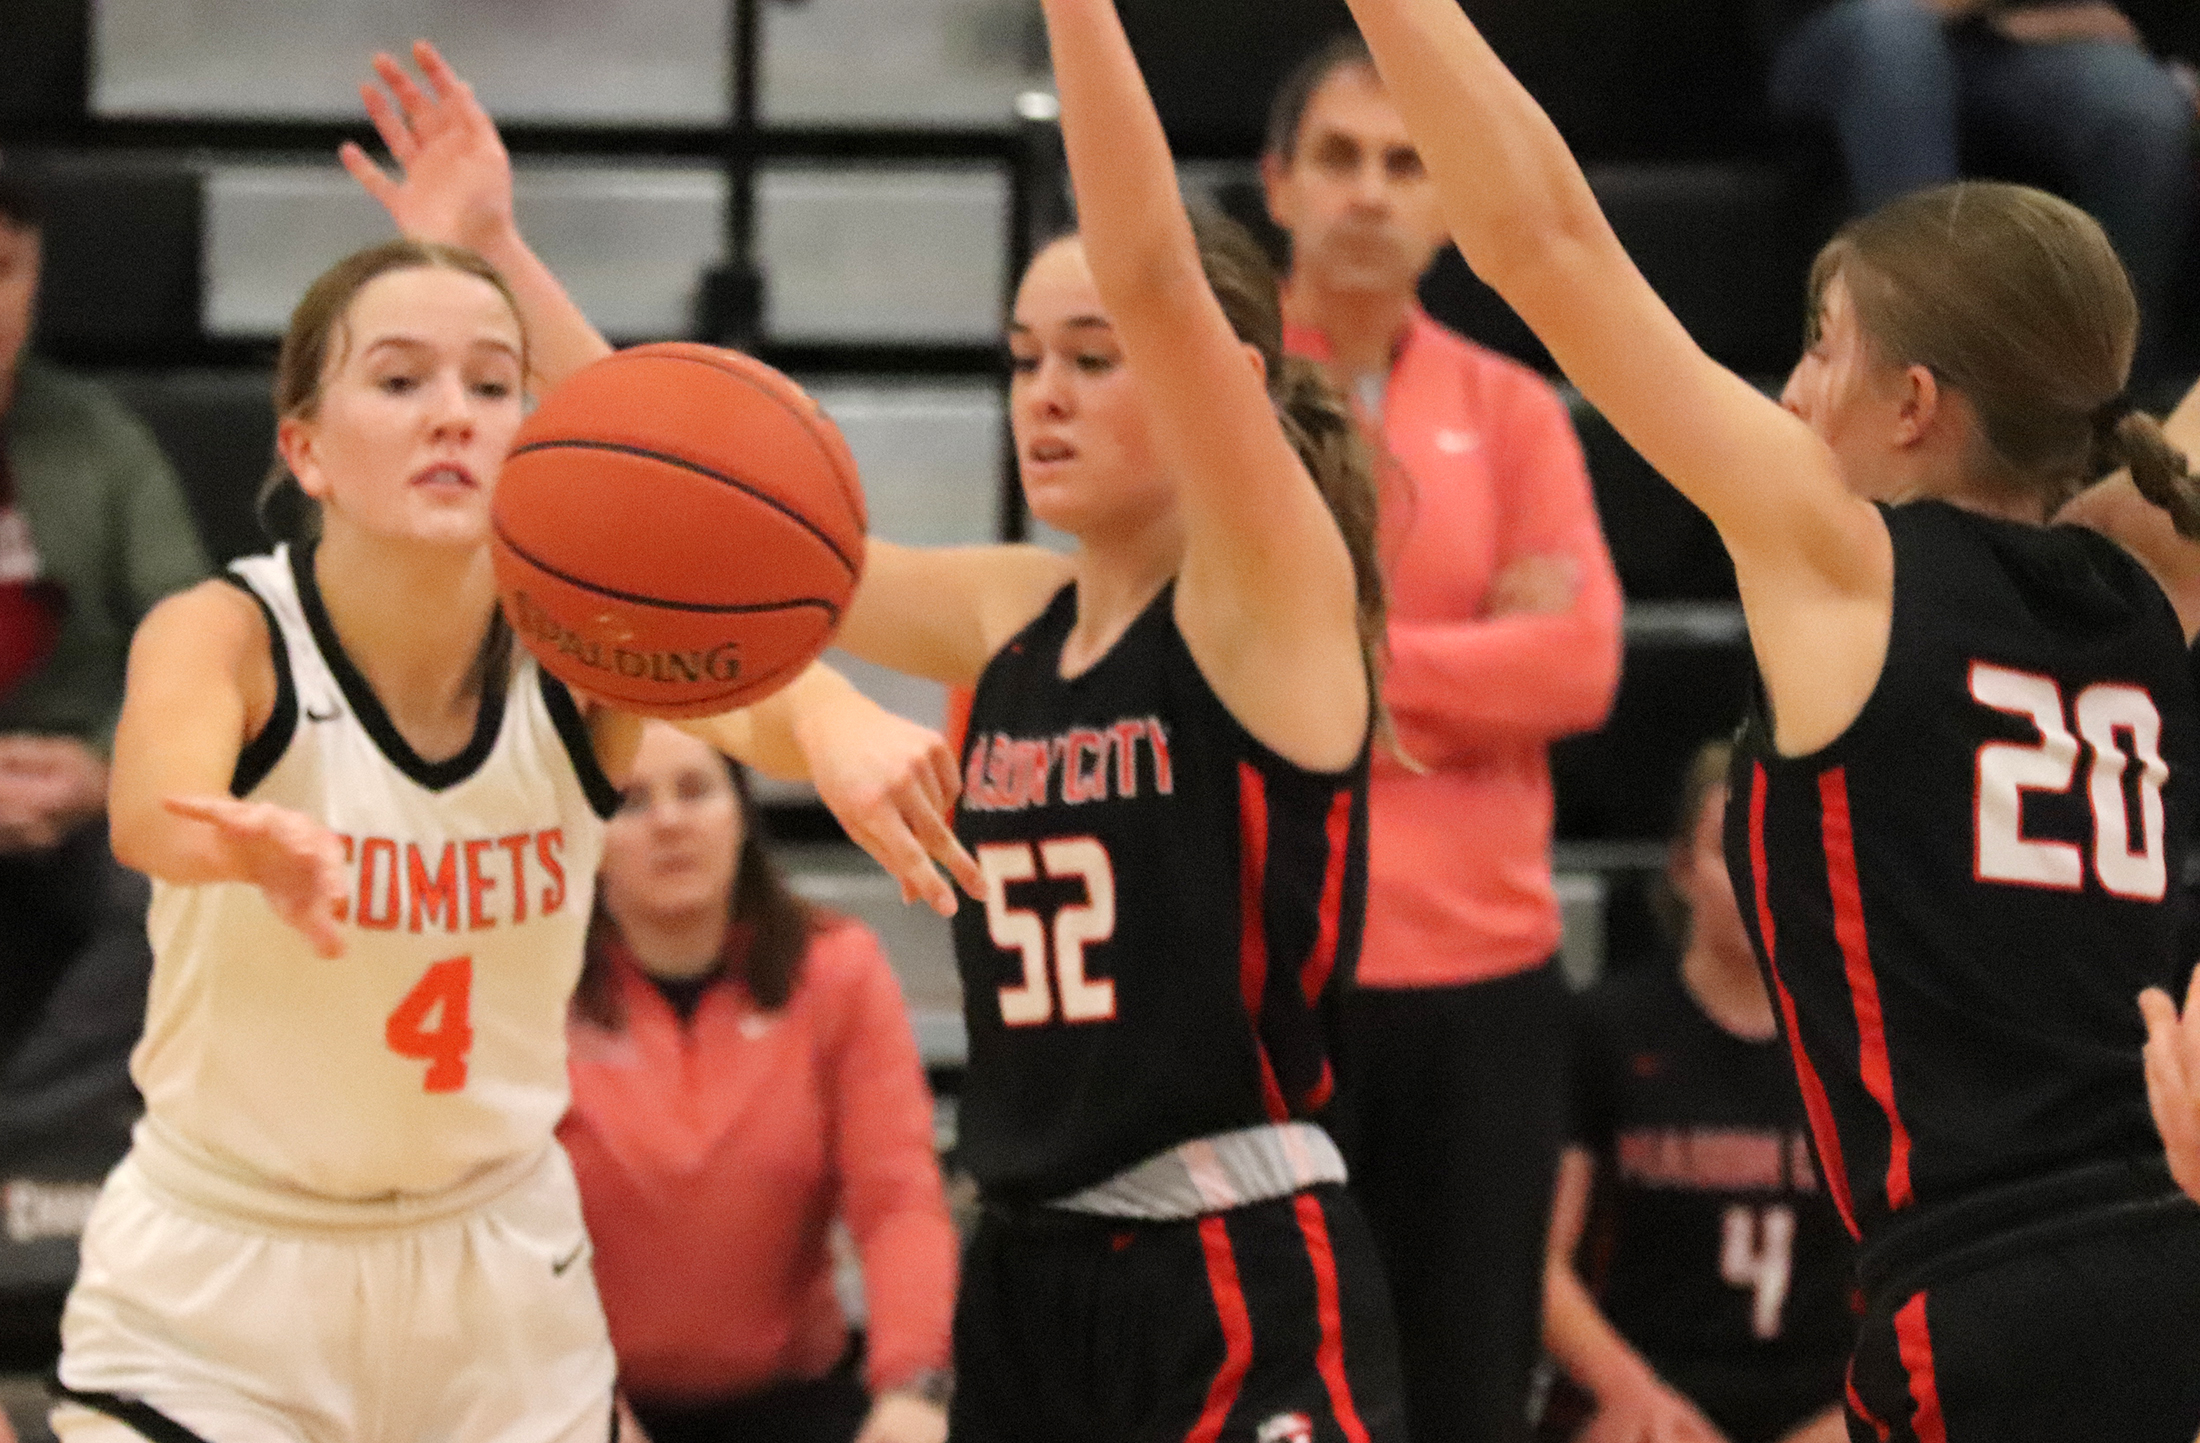 Strong 2nd half leads Comet boys past Indians for 7th straight win; CC girls draw Decorah for regional QF